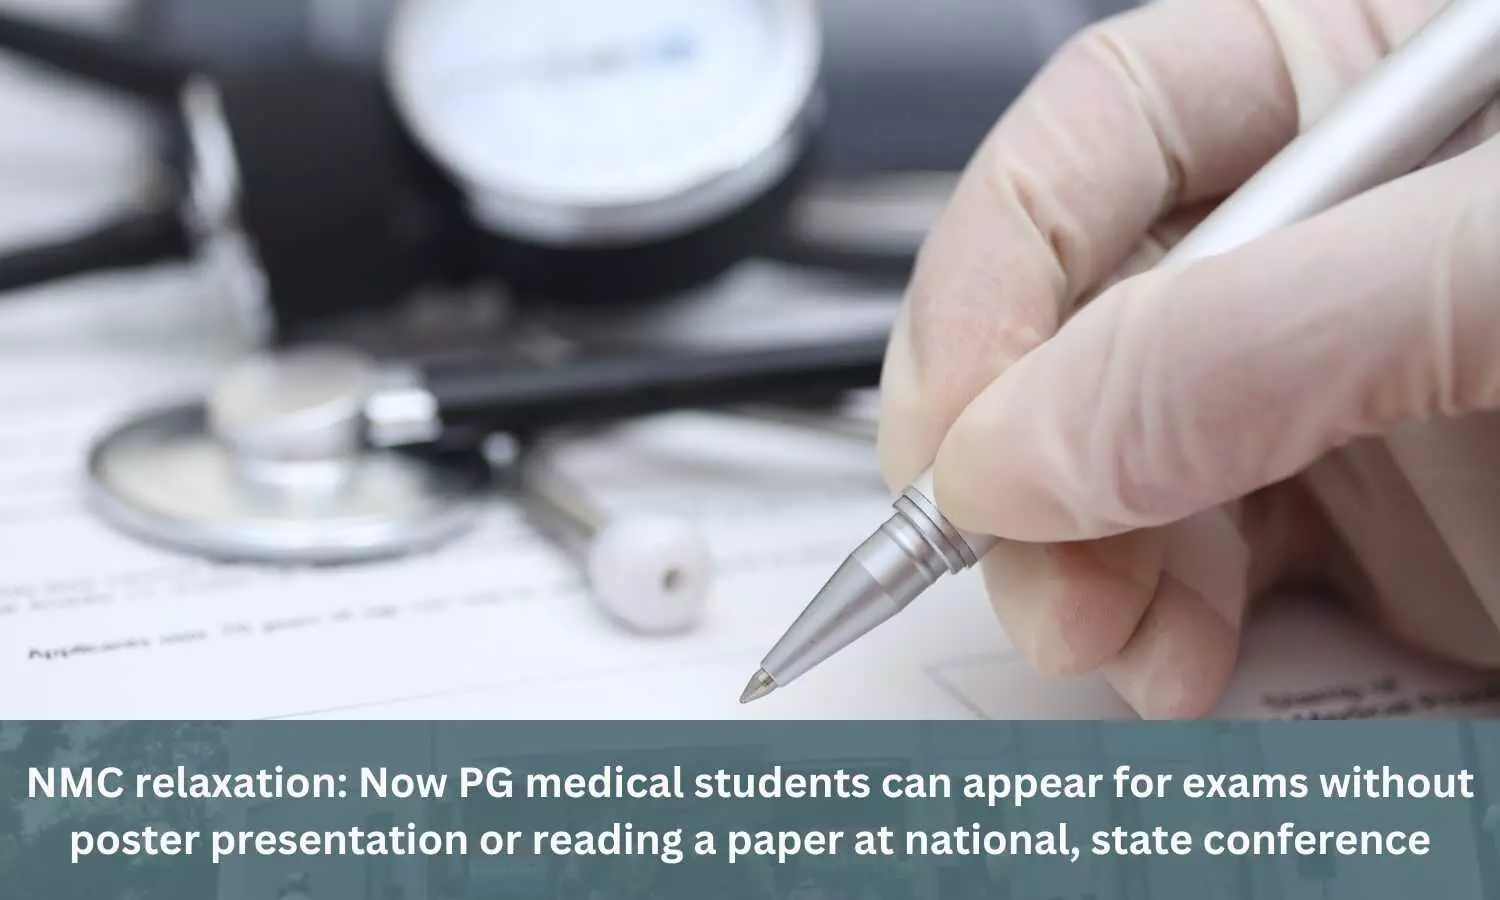 National Medical Commission relaxation: Now PG medical students can appear for exams without poster presentation or reading a paper at national, state conference